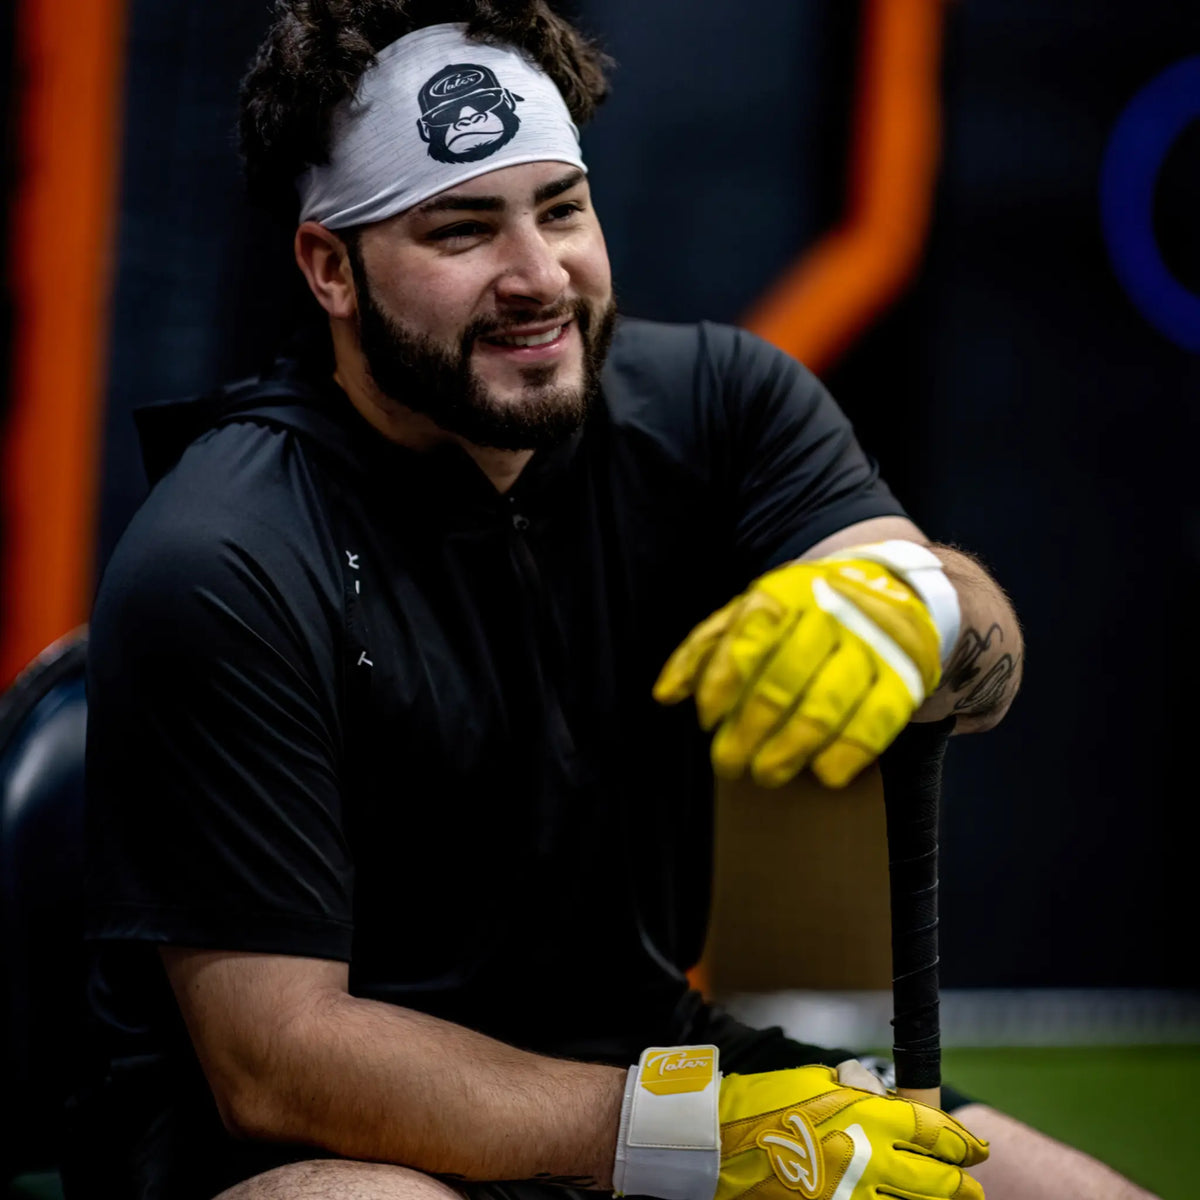 Relaxed professional baseball player wearing a Tater headband, featuring the Tater Kong logo, complemented by striking yellow Tater batting gloves, ready for action.